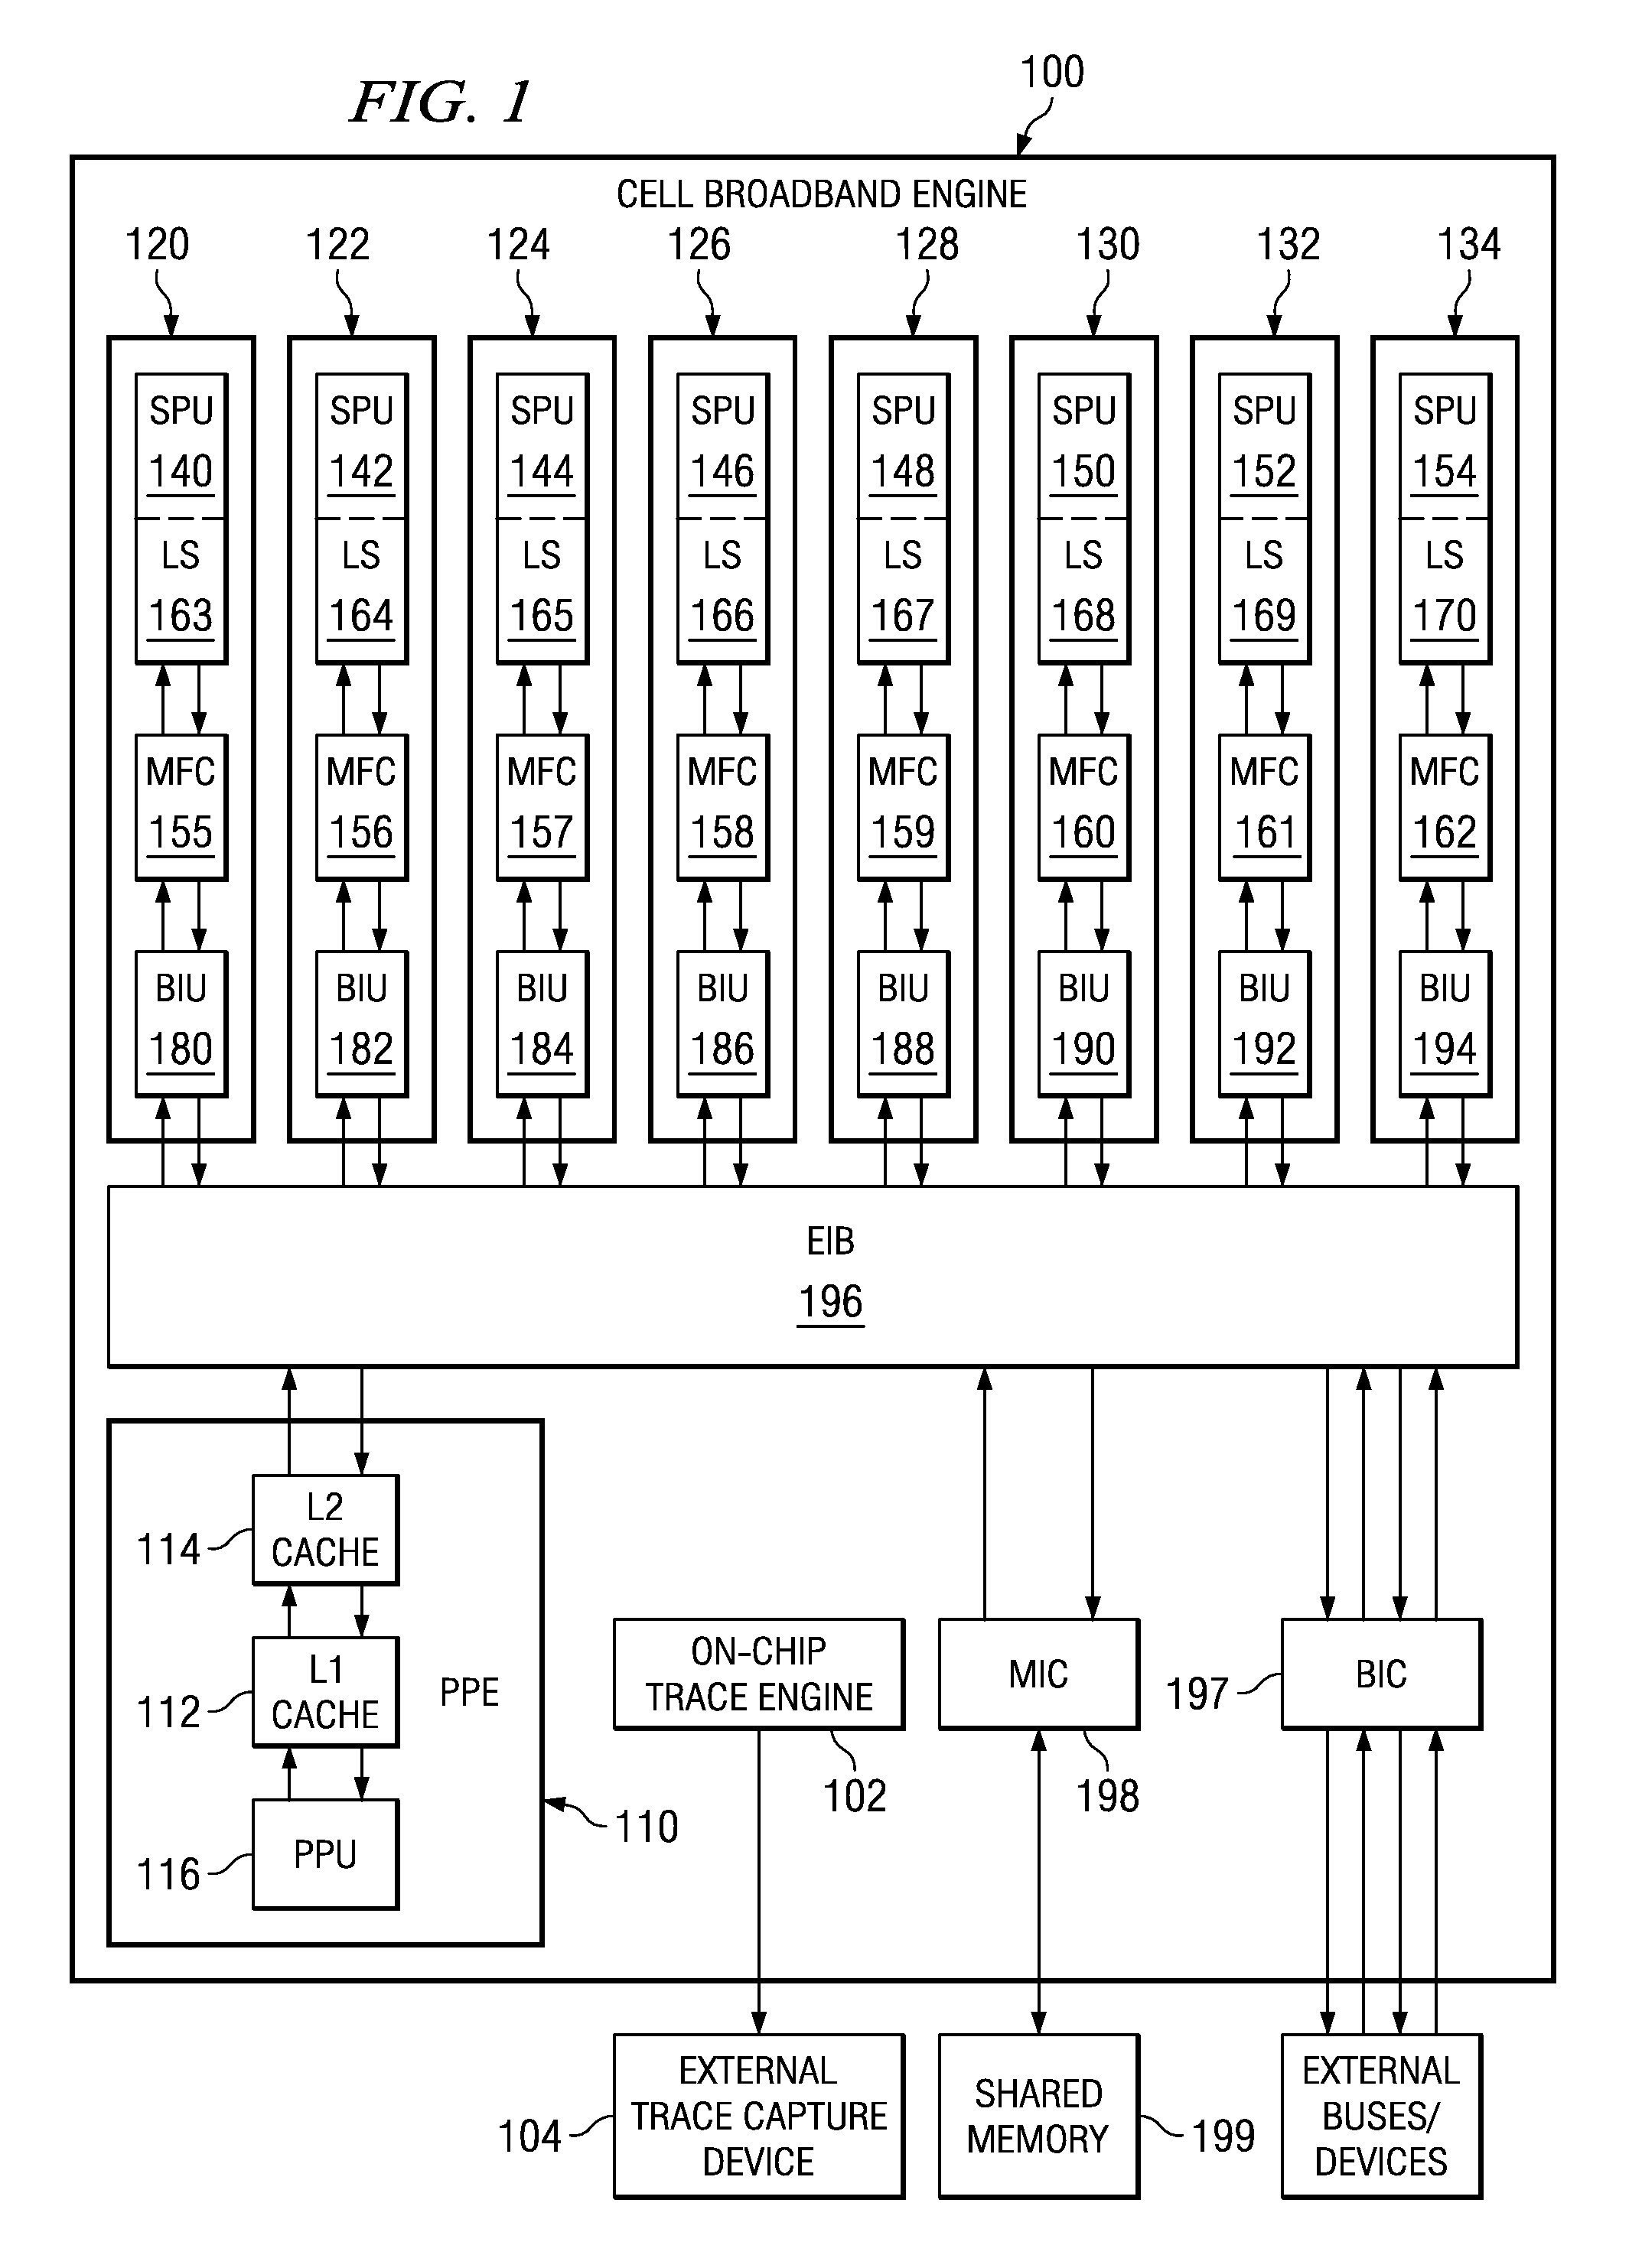 System and Method for Streaming High Frequency Trace Data Off-Chip